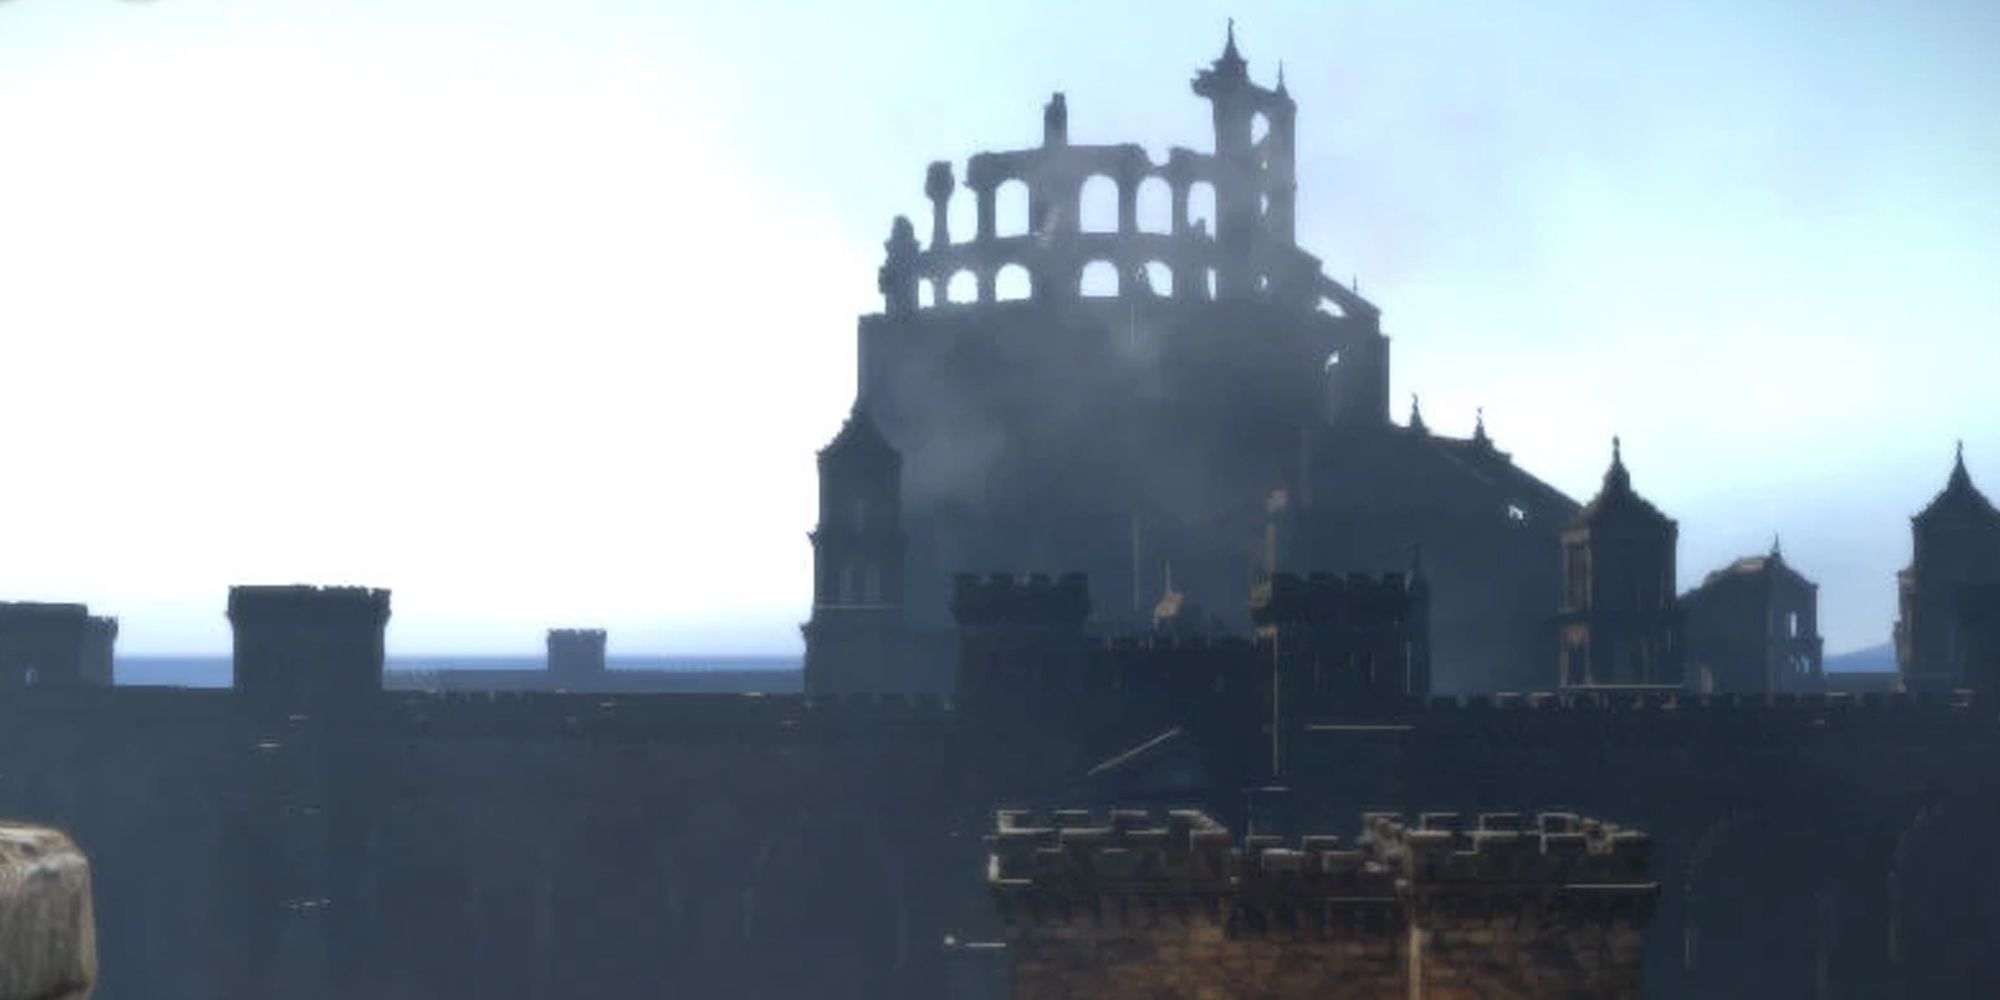 Dragon's Dogma Blue Moon Tower behind the ramparts